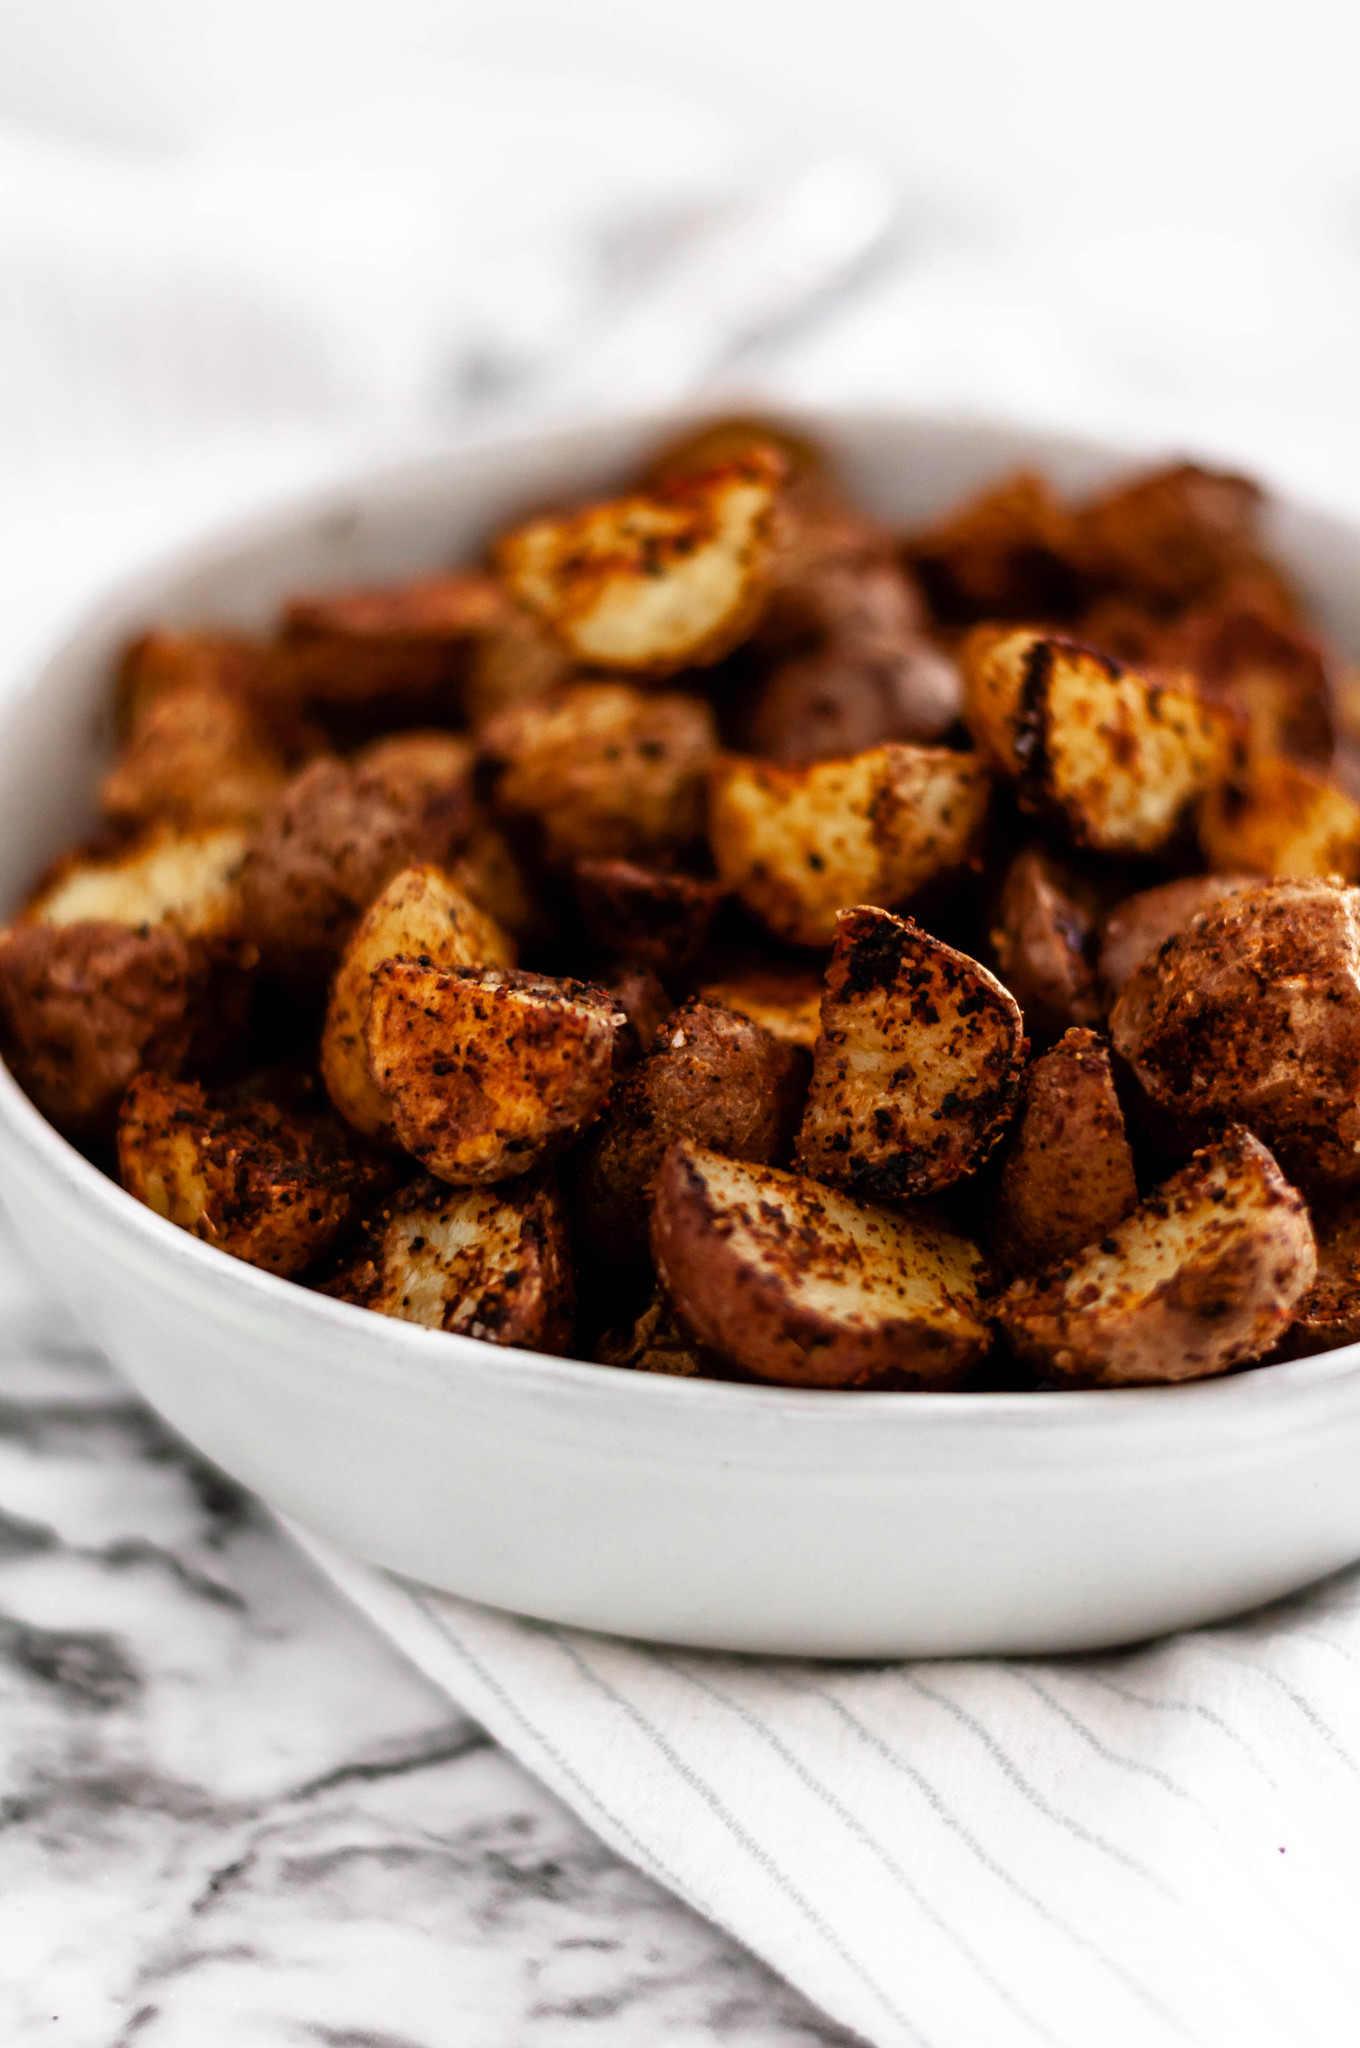 These Taco Roasted Potatoes are spiced up with your favorite taco spices. They make the perfect weeknight side dish, done in less than 30 minutes.